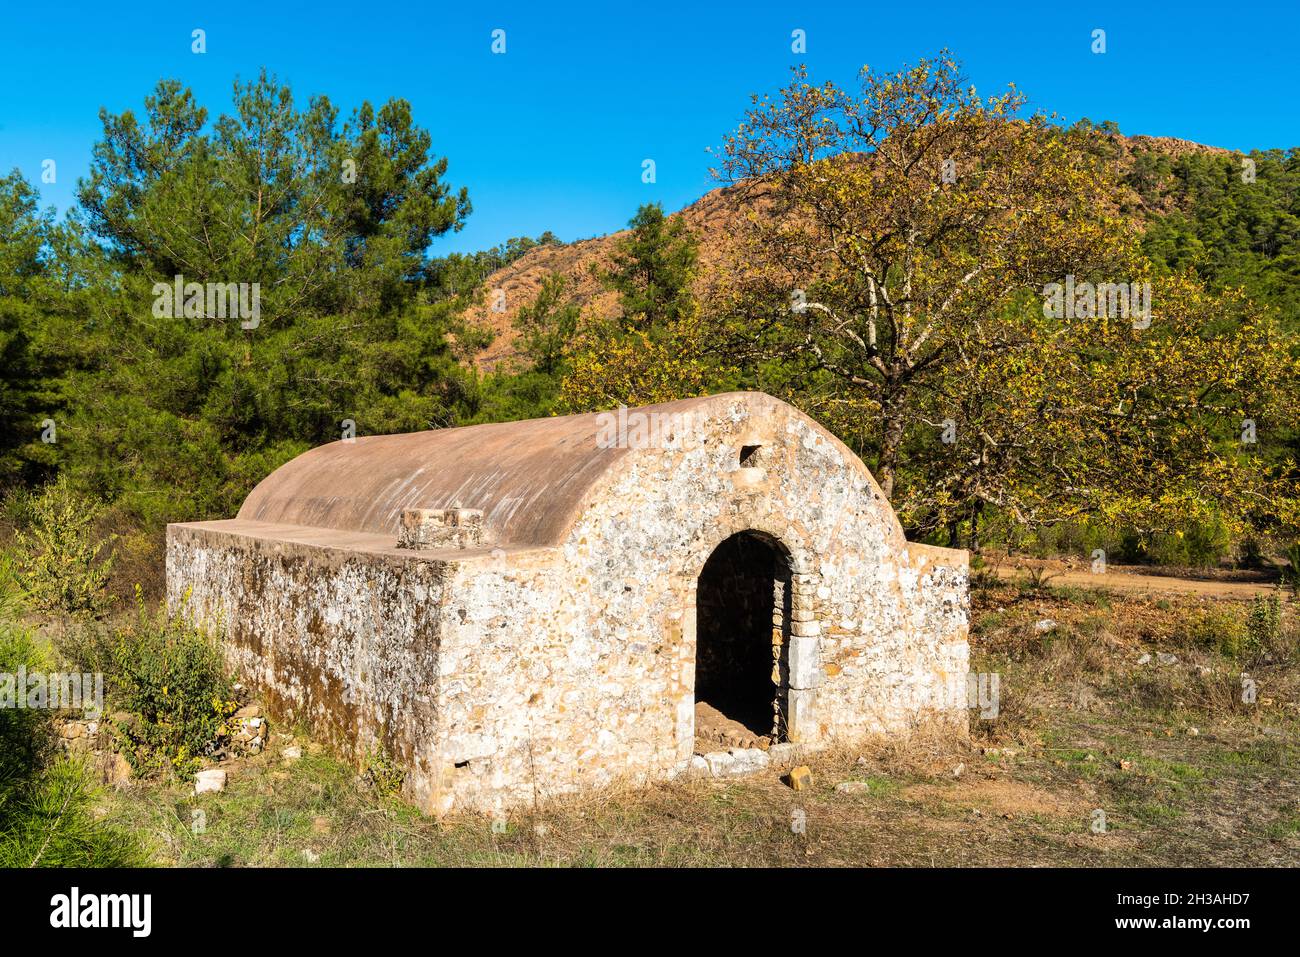 Historic stone structure known as Tashan, near Marmaris in Mugla province of Turkey. It was built by the Suleyman the Magnificent in 1552. Stock Photo